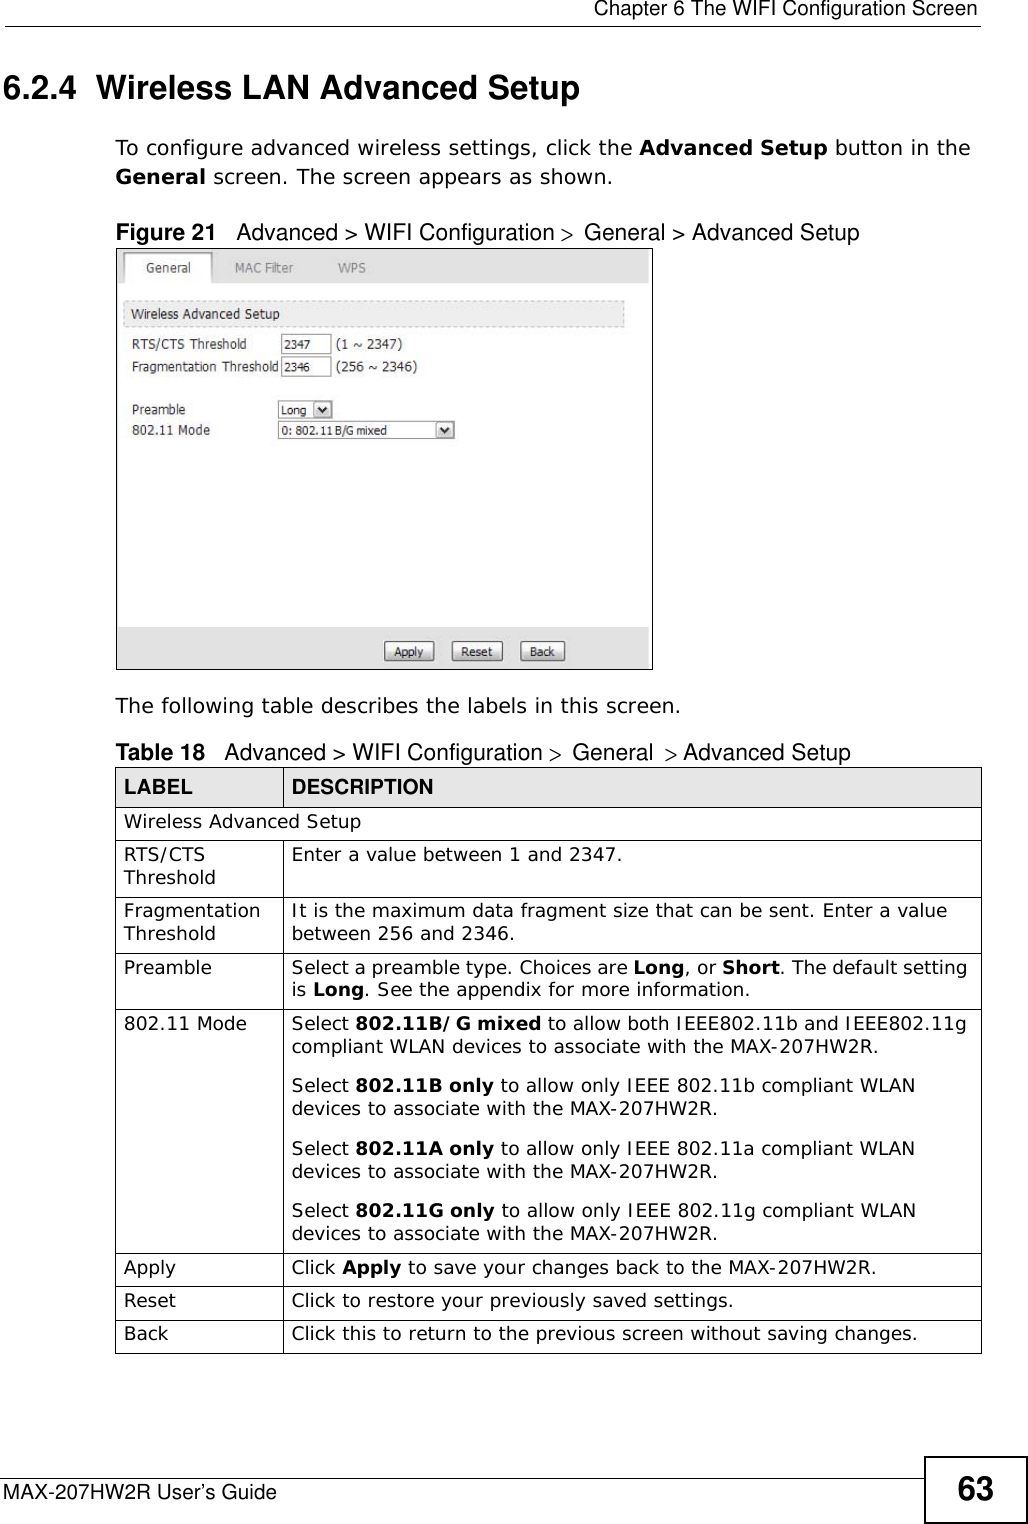  Chapter 6 The WIFI Configuration ScreenMAX-207HW2R User’s Guide 636.2.4  Wireless LAN Advanced Setup To configure advanced wireless settings, click the Advanced Setup button in the General screen. The screen appears as shown.Figure 21   Advanced &gt; WIFI Configuration &gt; General &gt; Advanced Setup The following table describes the labels in this screen. Table 18   Advanced &gt; WIFI Configuration &gt; General &gt; Advanced Setup LABEL DESCRIPTIONWireless Advanced SetupRTS/CTS Threshold Enter a value between 1 and 2347. Fragmentation Threshold It is the maximum data fragment size that can be sent. Enter a value between 256 and 2346. Preamble Select a preamble type. Choices are Long, or Short. The default setting is Long. See the appendix for more information.802.11 Mode Select 802.11B/G mixed to allow both IEEE802.11b and IEEE802.11g compliant WLAN devices to associate with the MAX-207HW2R. Select 802.11B only to allow only IEEE 802.11b compliant WLAN devices to associate with the MAX-207HW2R.Select 802.11A only to allow only IEEE 802.11a compliant WLAN devices to associate with the MAX-207HW2R.Select 802.11G only to allow only IEEE 802.11g compliant WLAN devices to associate with the MAX-207HW2R.Apply Click Apply to save your changes back to the MAX-207HW2R.Reset Click to restore your previously saved settings.Back Click this to return to the previous screen without saving changes.